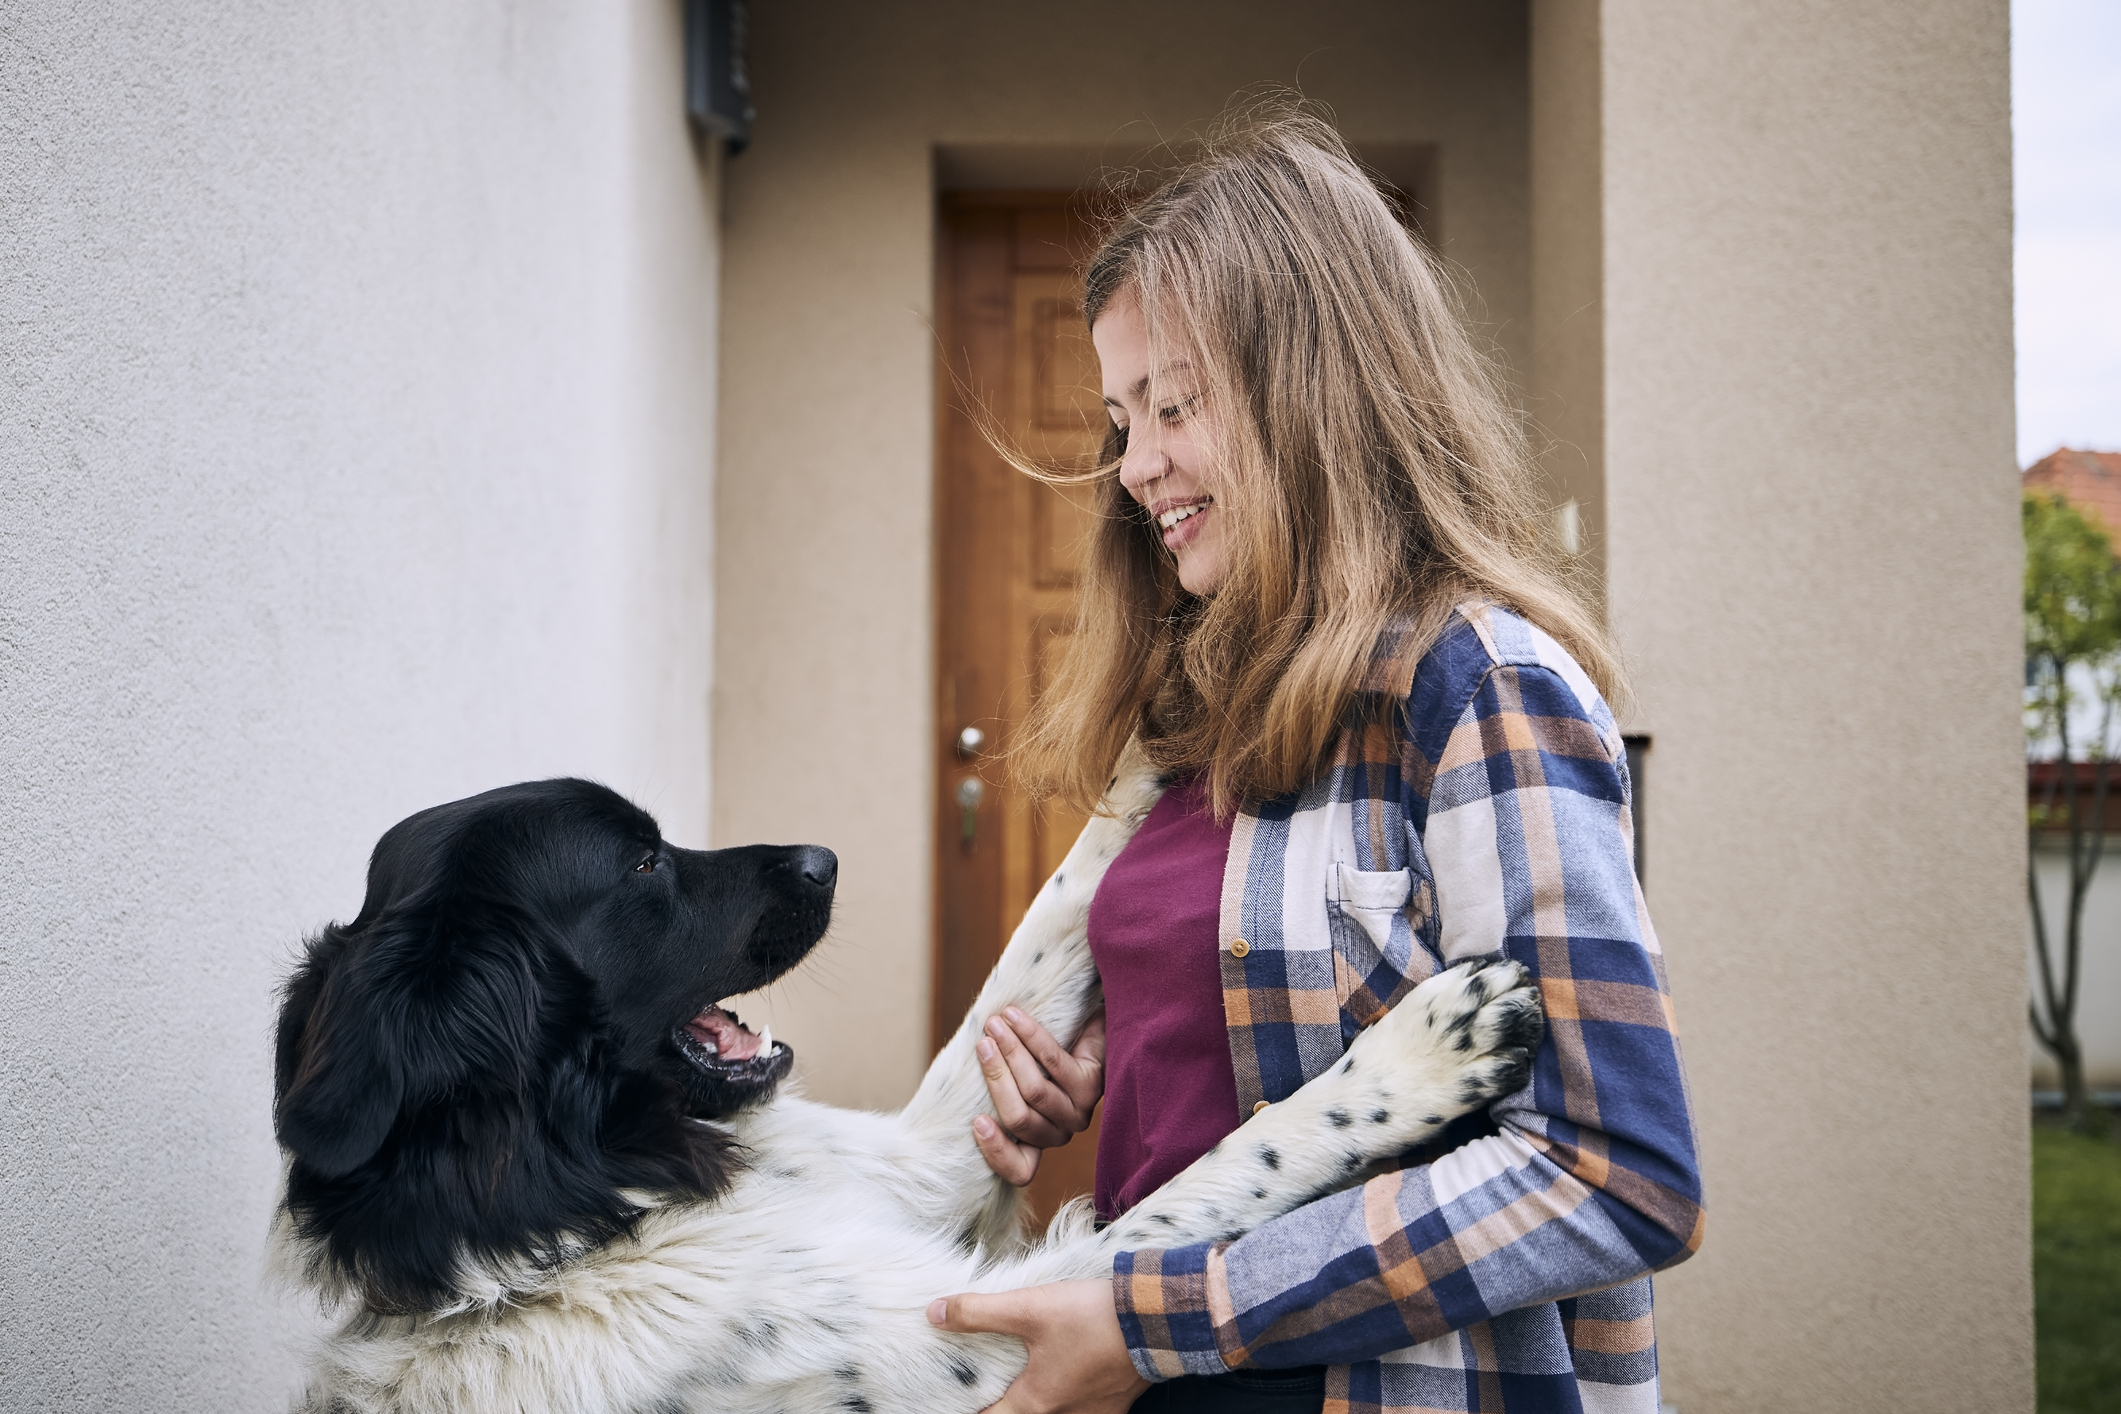 A smiling person standing, interacting with a happy dog by a house entrance